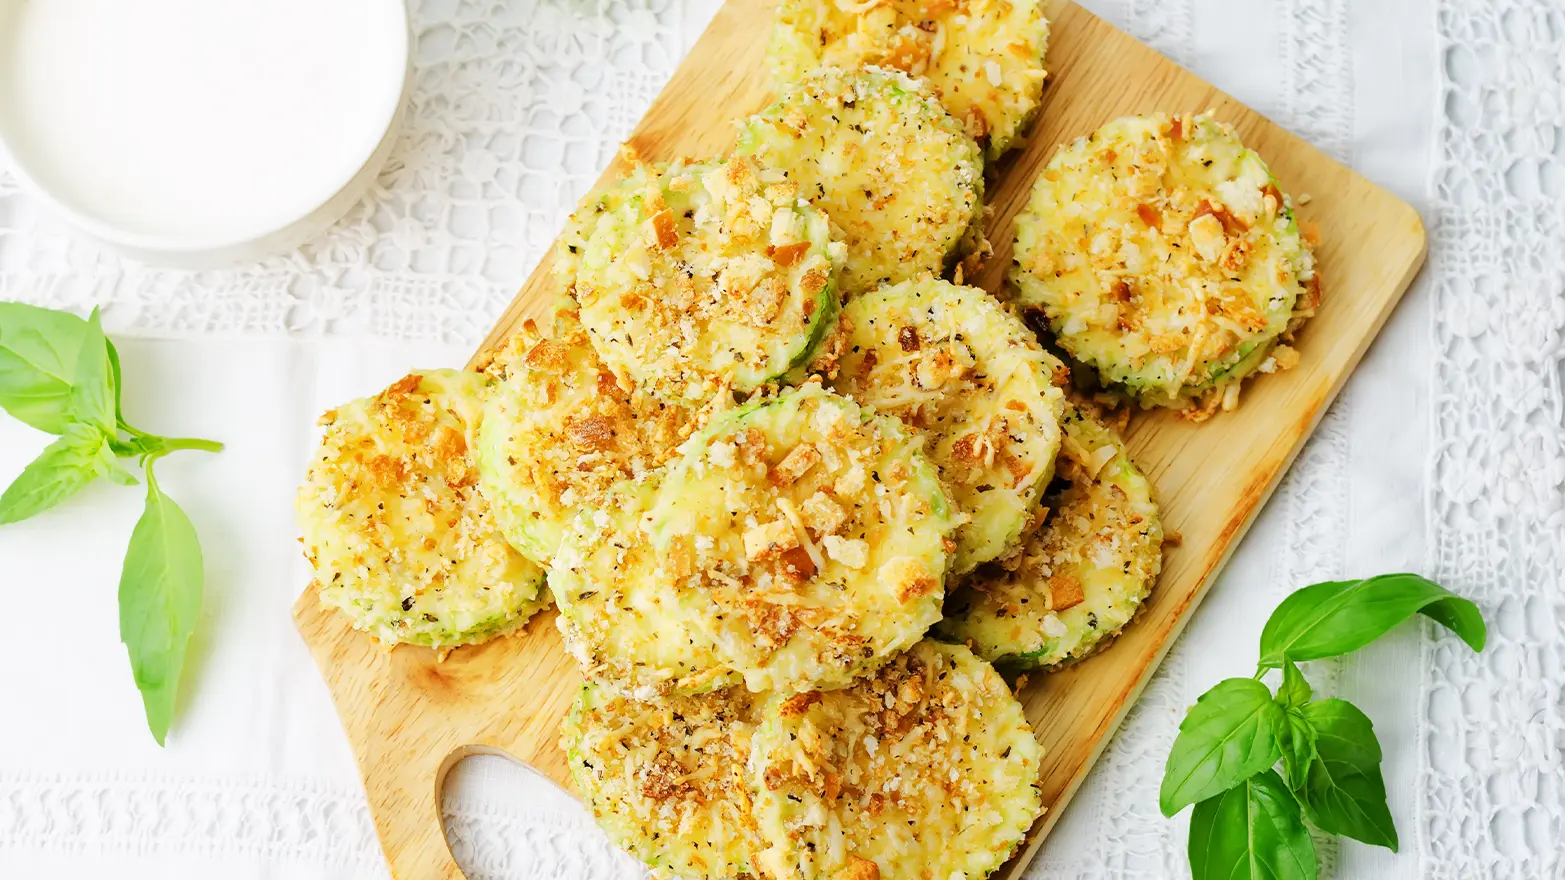 Roasted zucchini with parmesan breadcrumbs